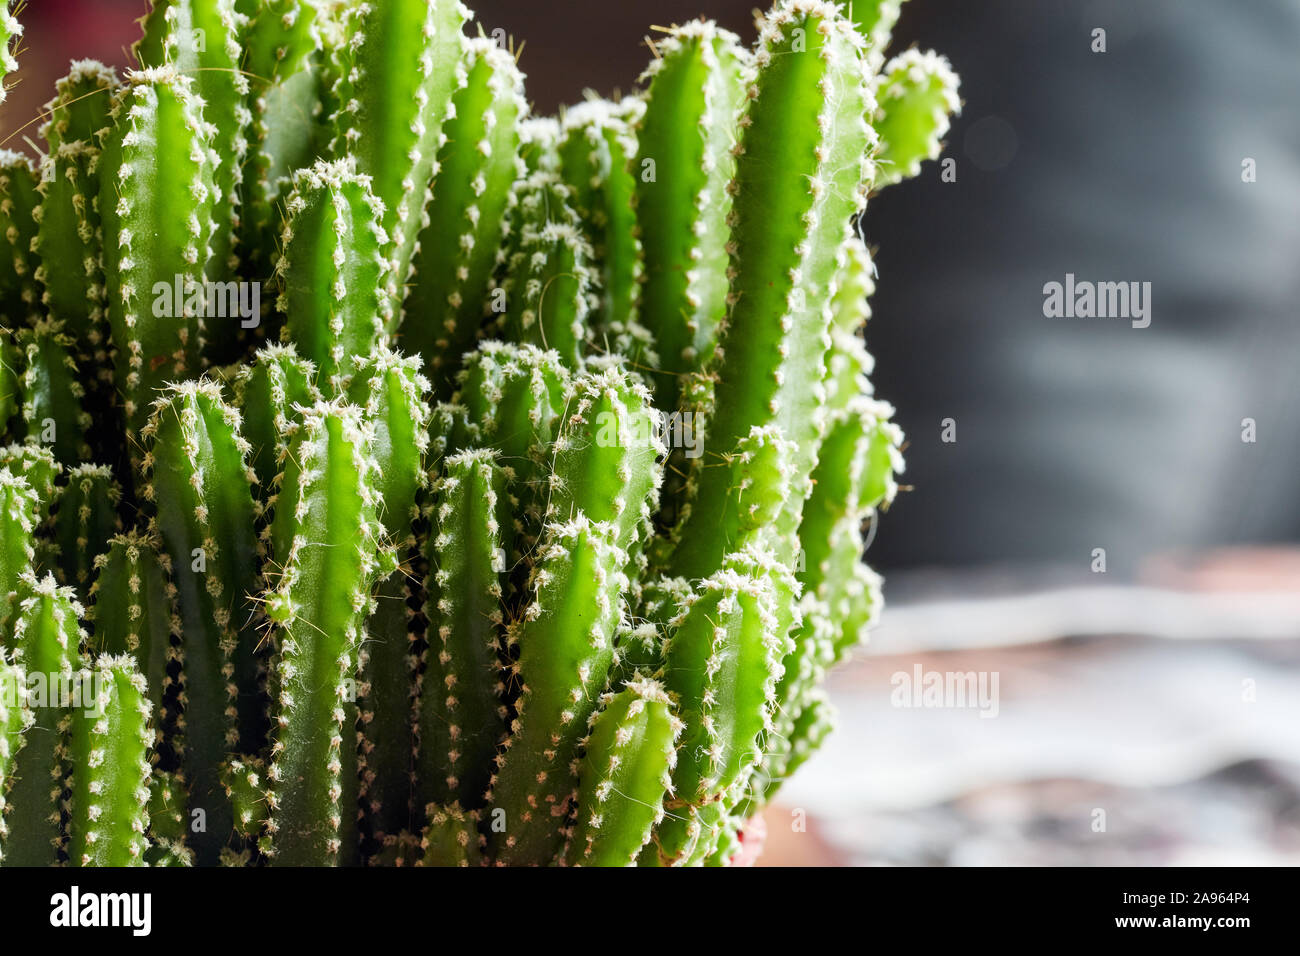 large decorative green cactus with small needles Stock Photo